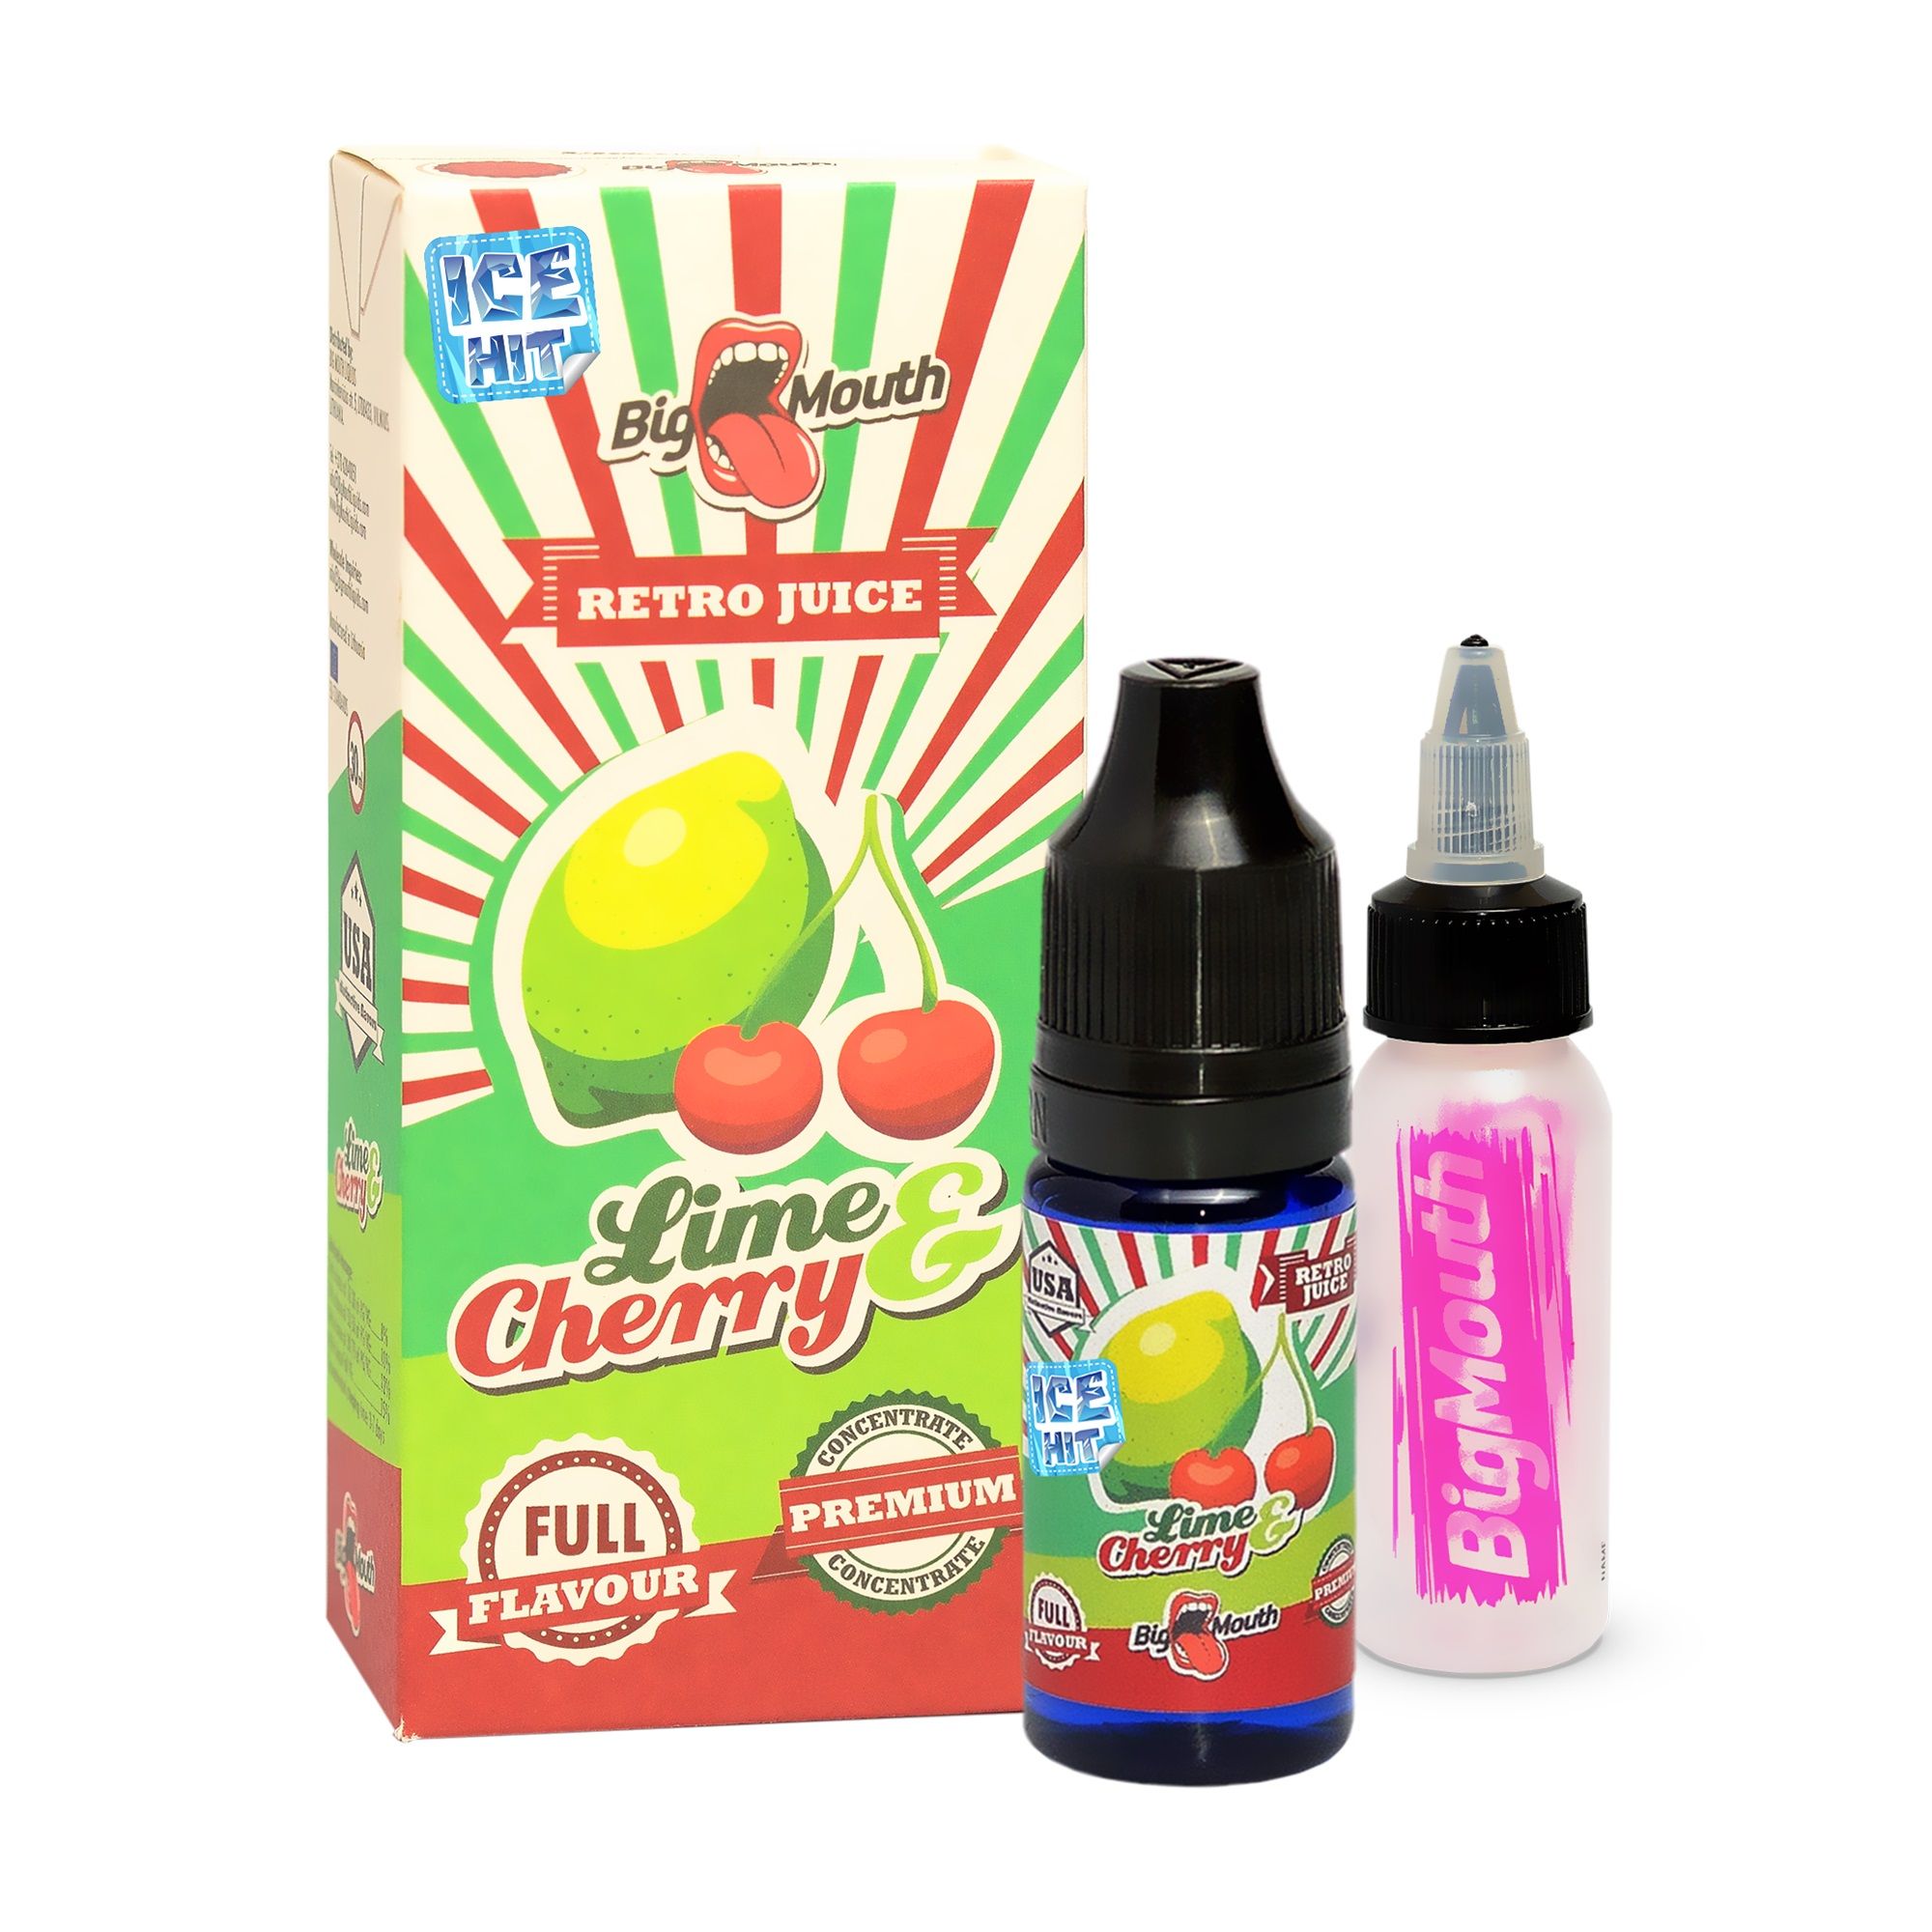 BIG MOUTH AROMA LIME & CHERRY ICE HIT 10 ml